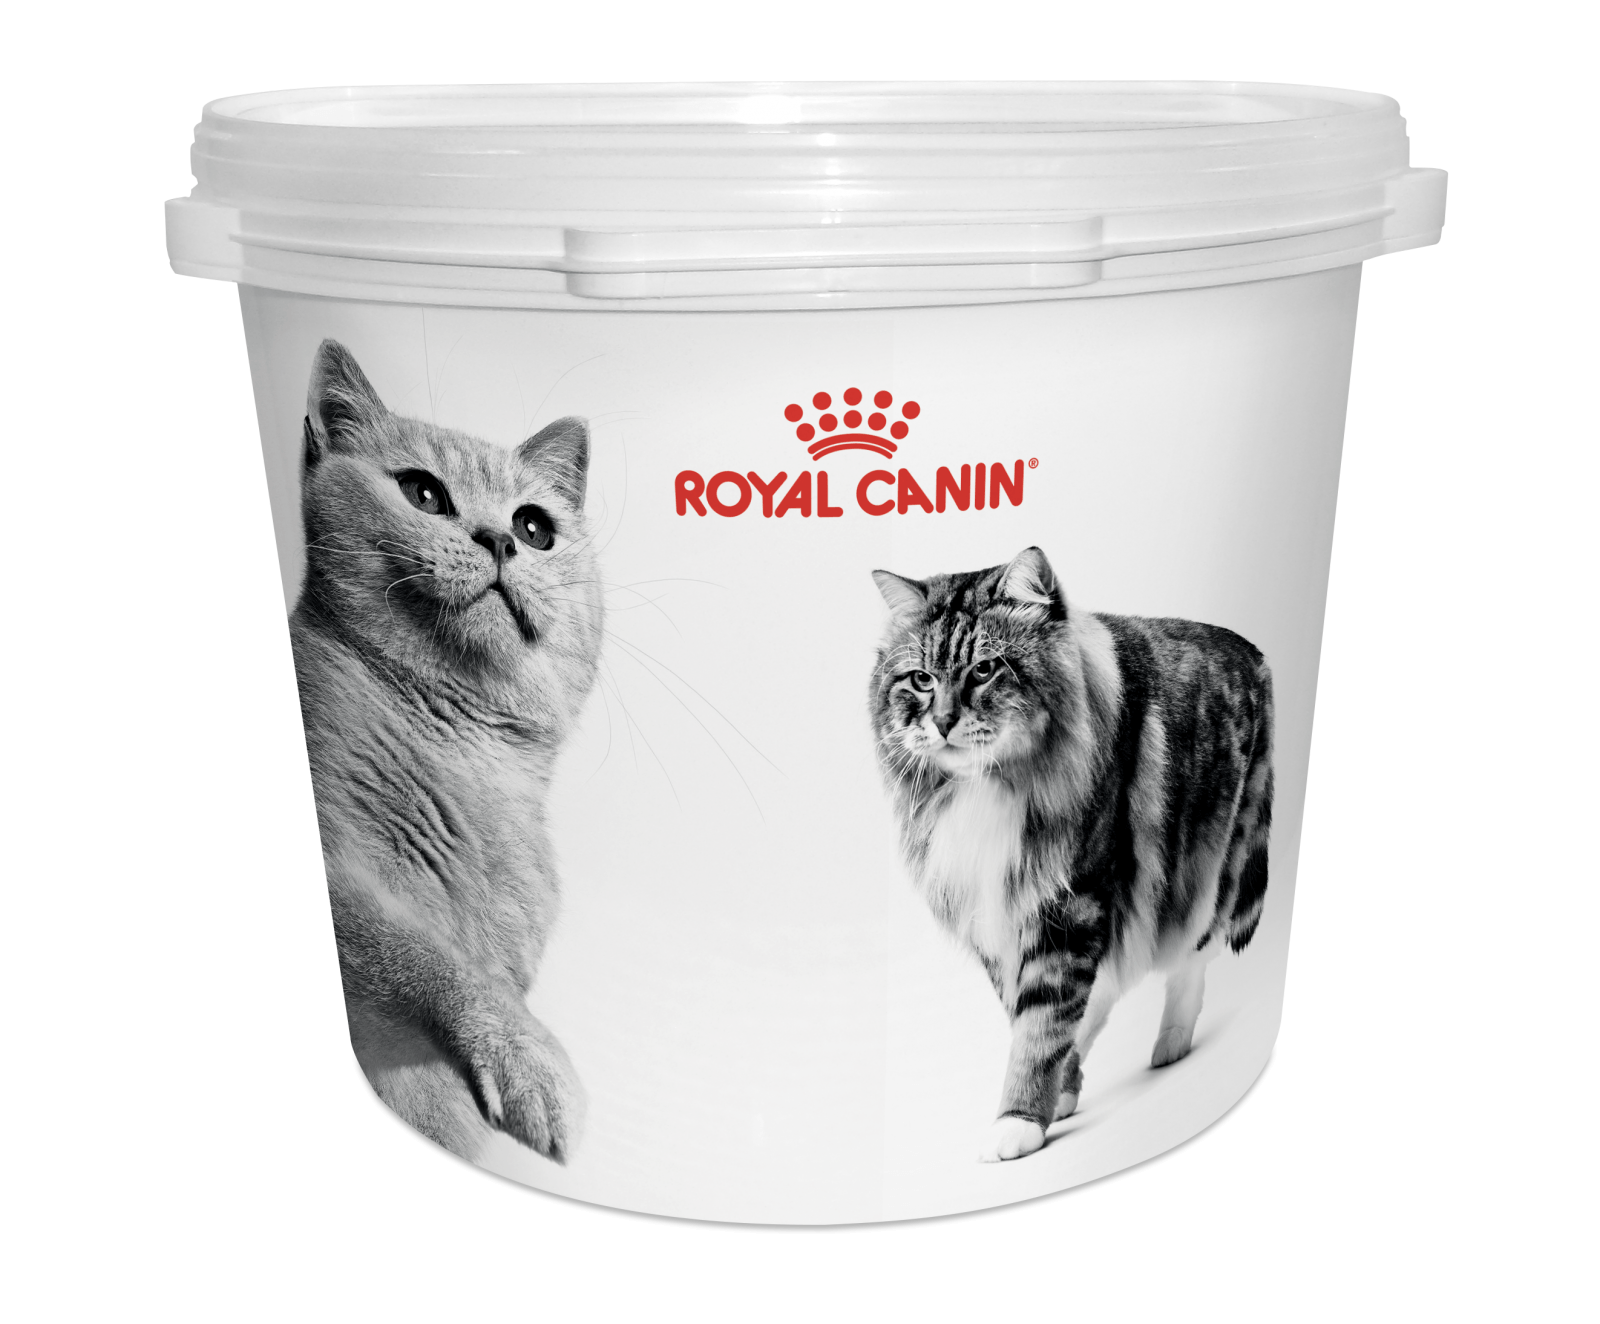 PROMO Container Royal Canin Pisica, 4 kg